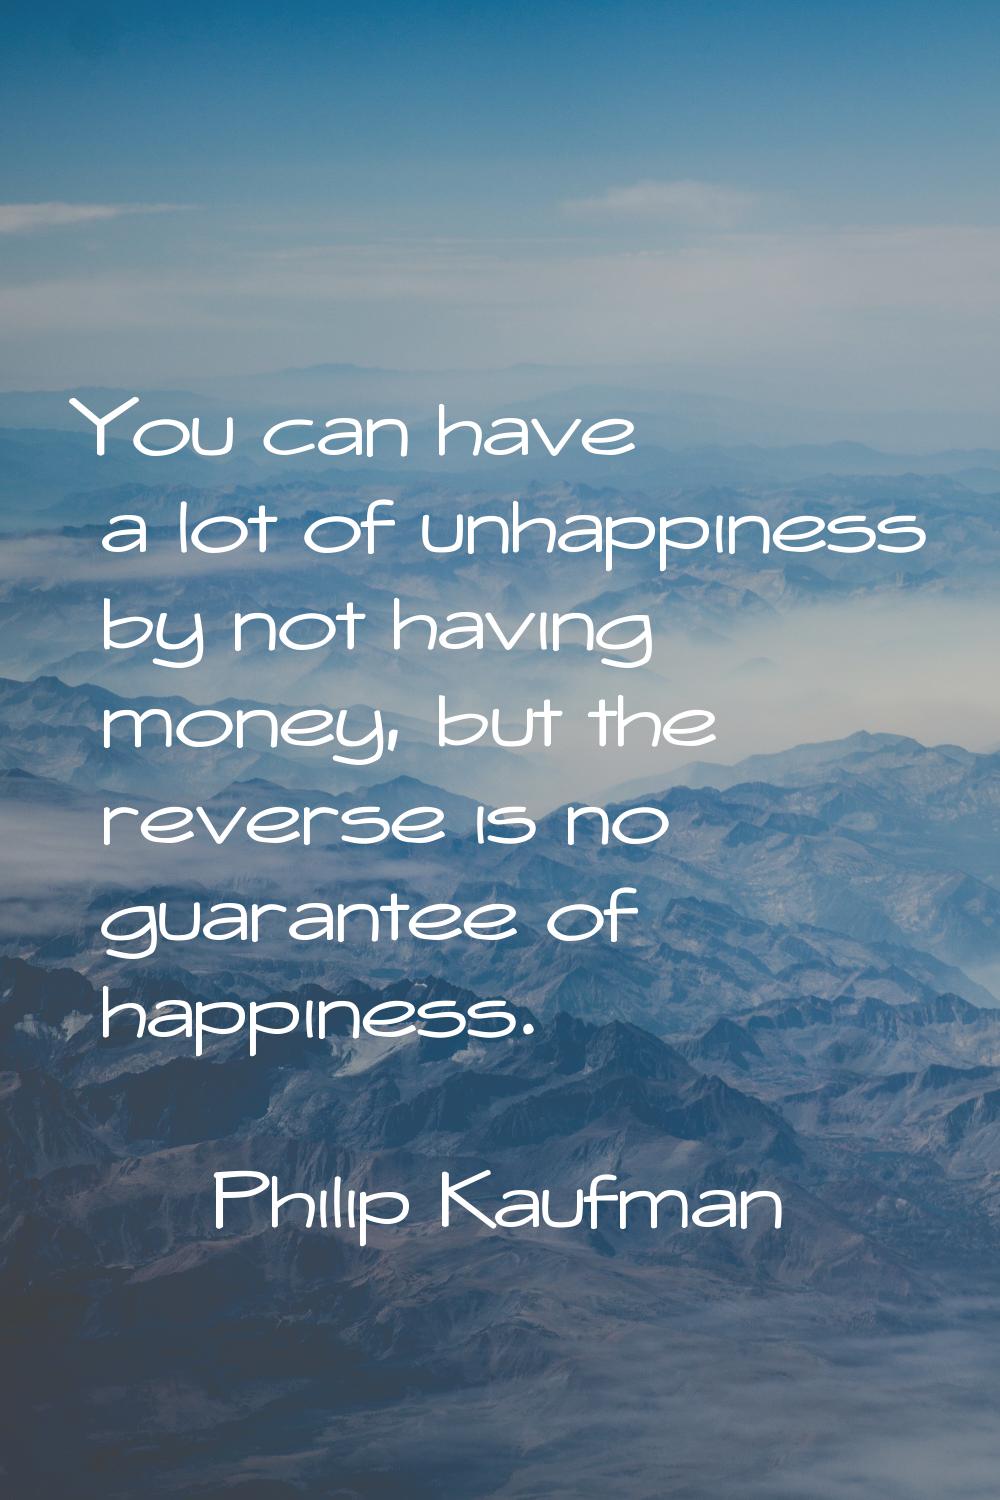 You can have a lot of unhappiness by not having money, but the reverse is no guarantee of happiness